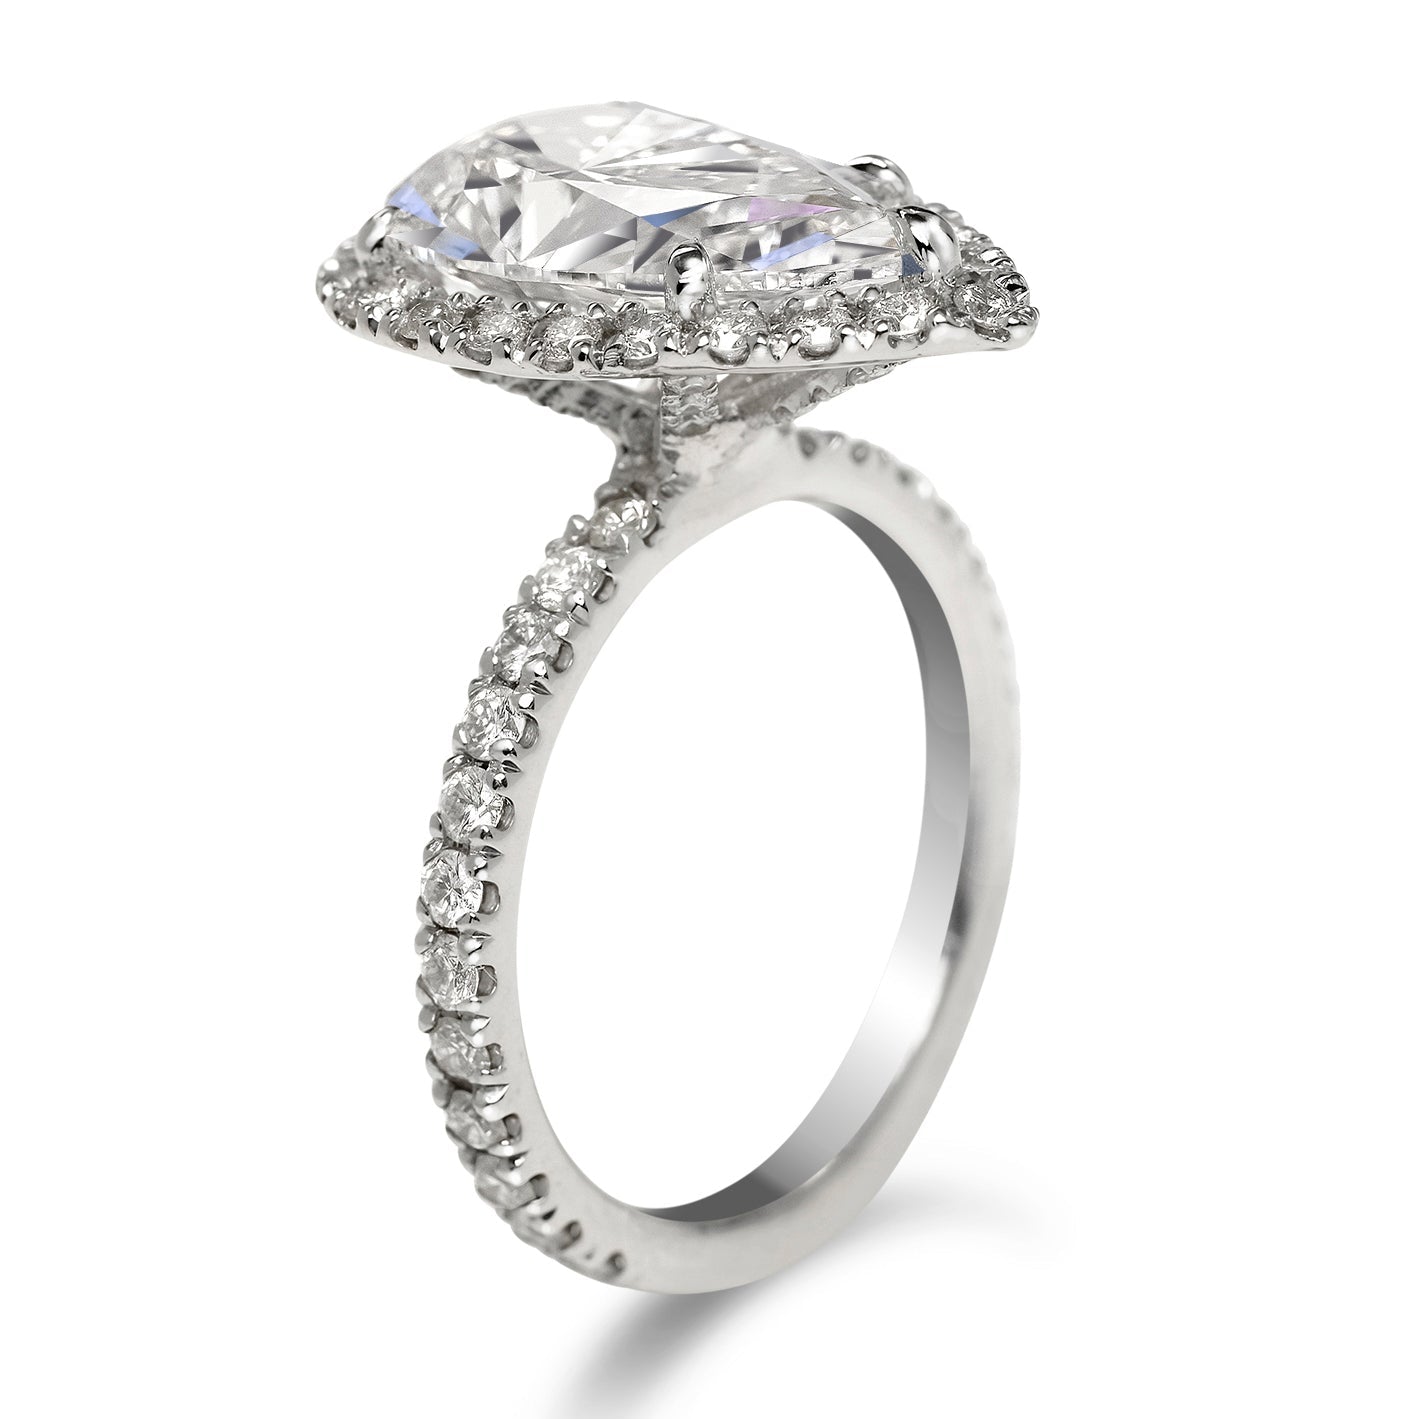 Diamond Ring Pear Shape Cut 4 Carat Halo Ring in Platinum Side View